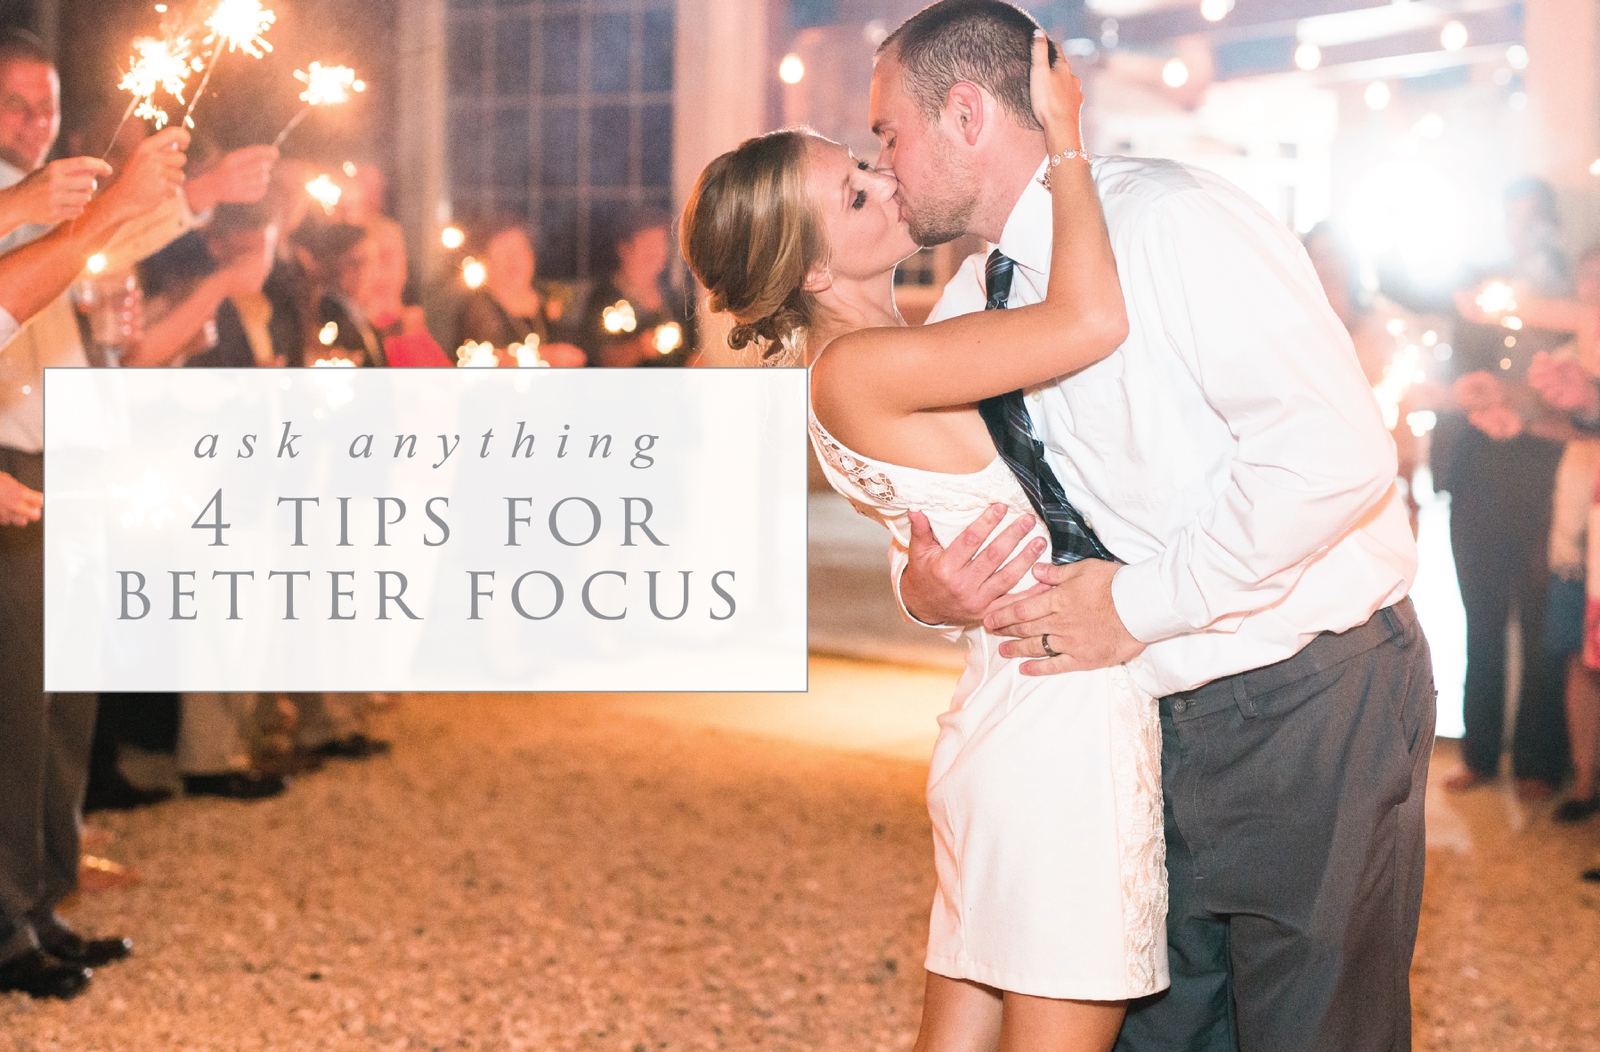 virginia wedding photographer 4 tips for better focus and sharper images